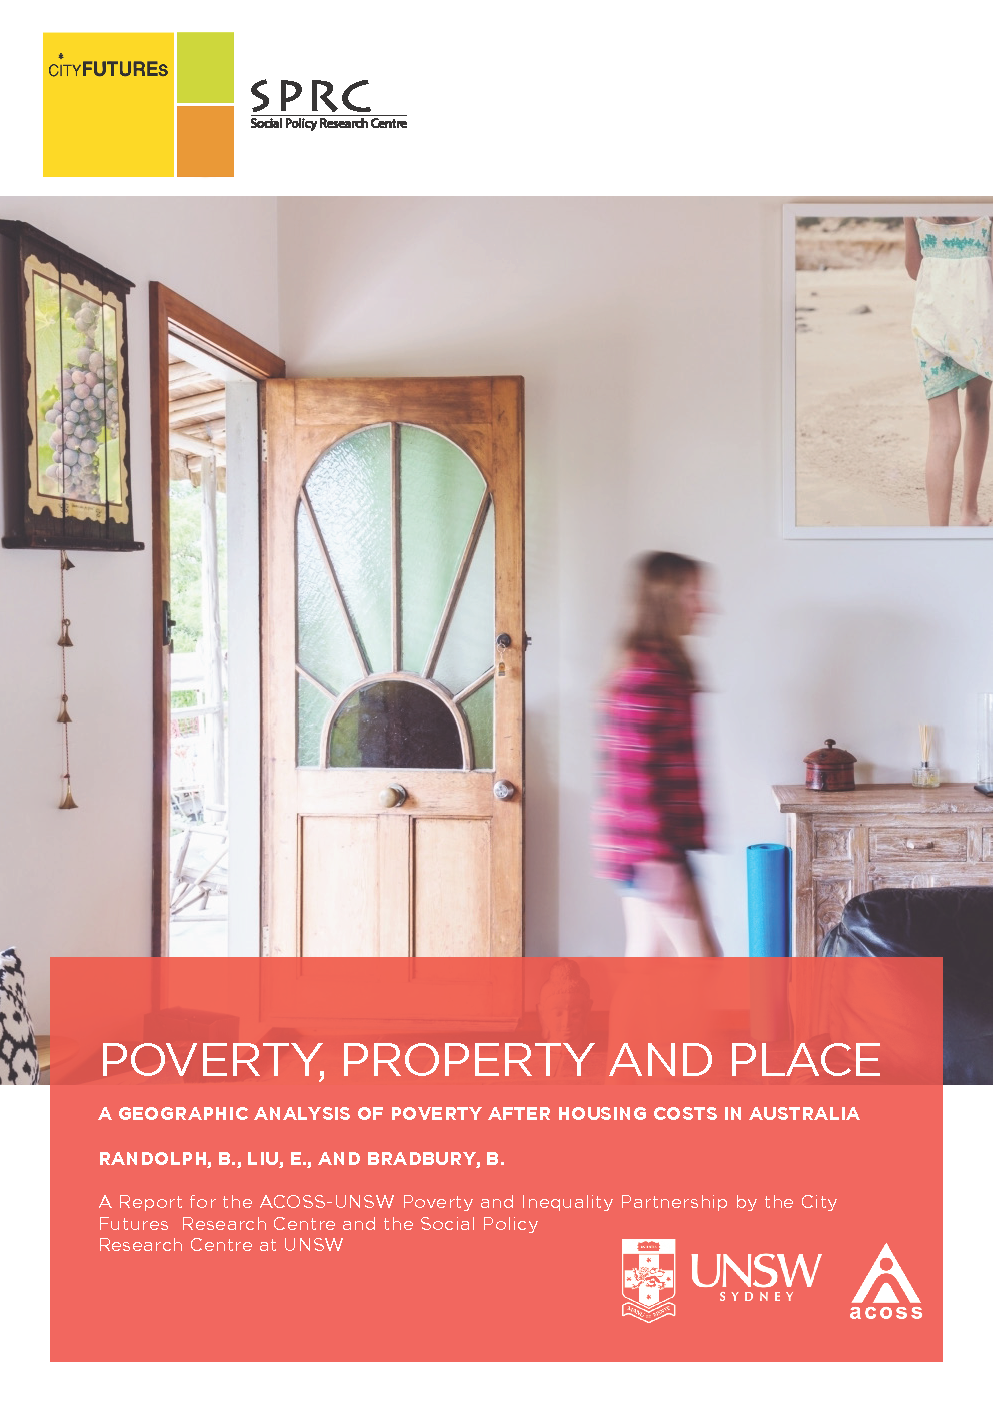  https://cityfutures.be.unsw.edu.au/media/images/Pages_from_Poverty-property-and-place.original.png